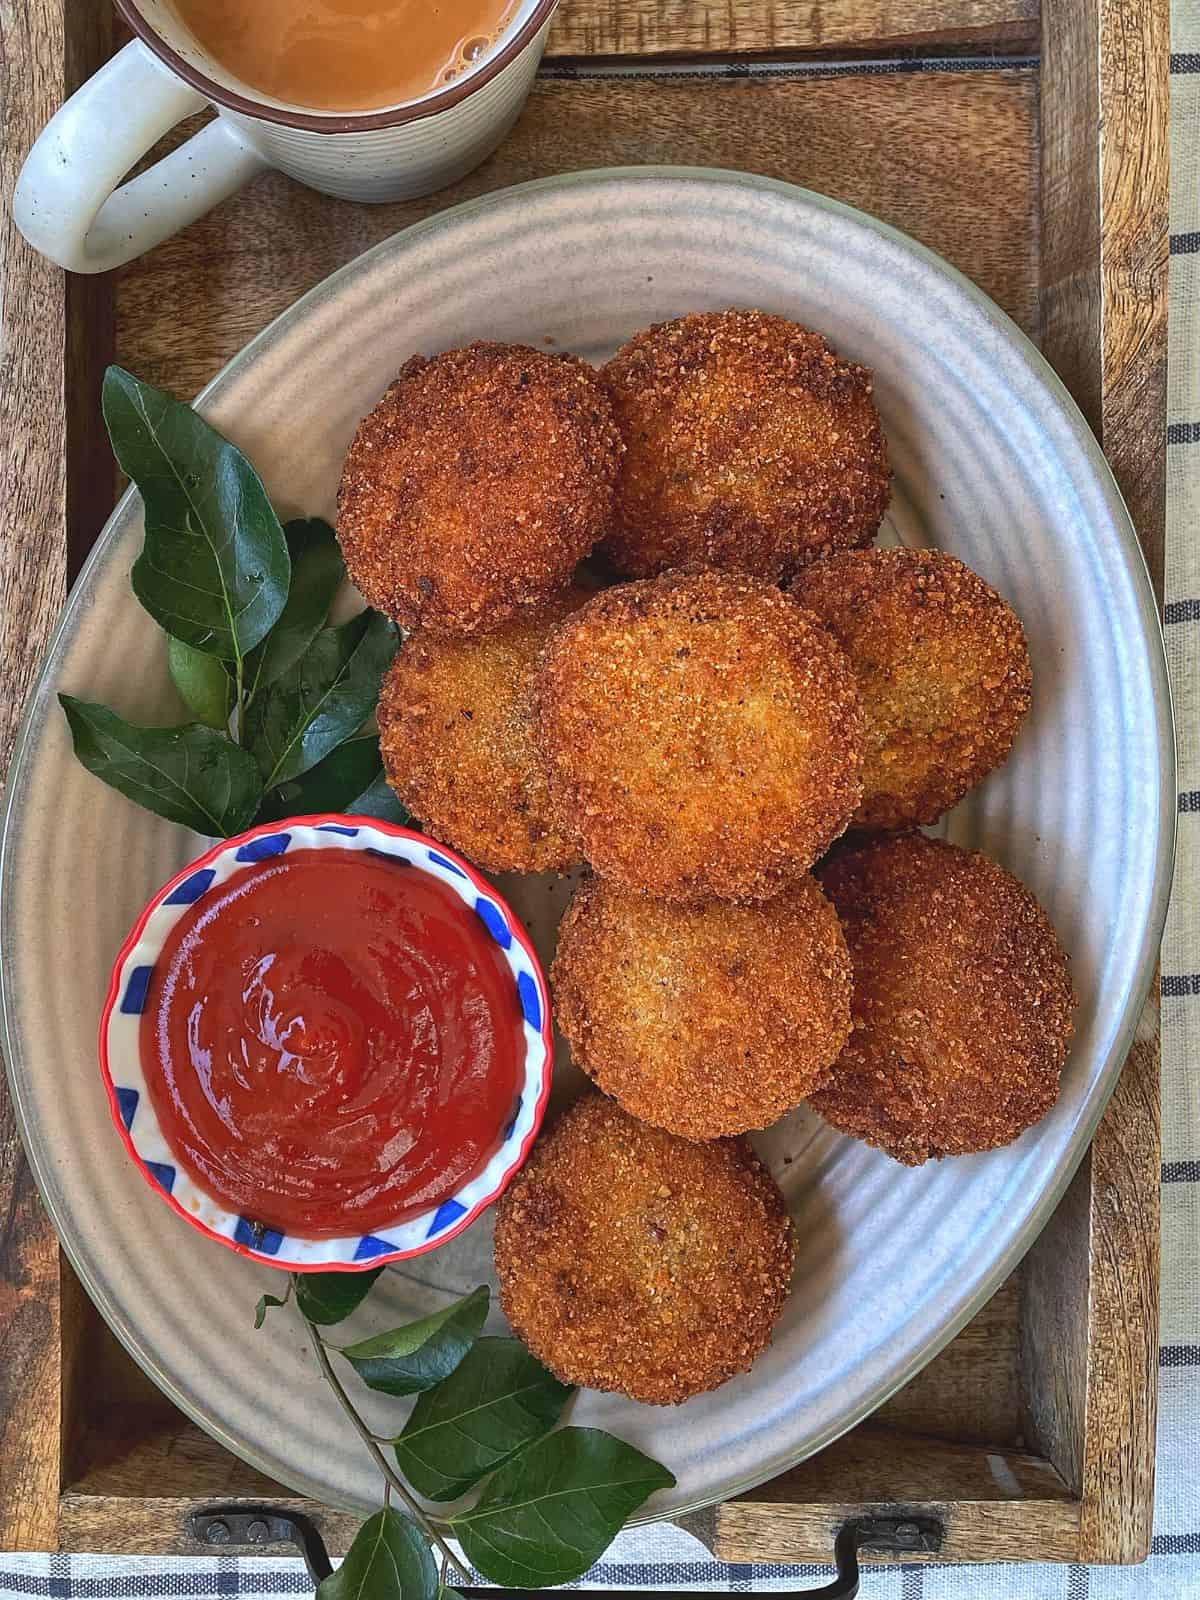 A platter of fried tuna cutlets with a small bowl of ketchup